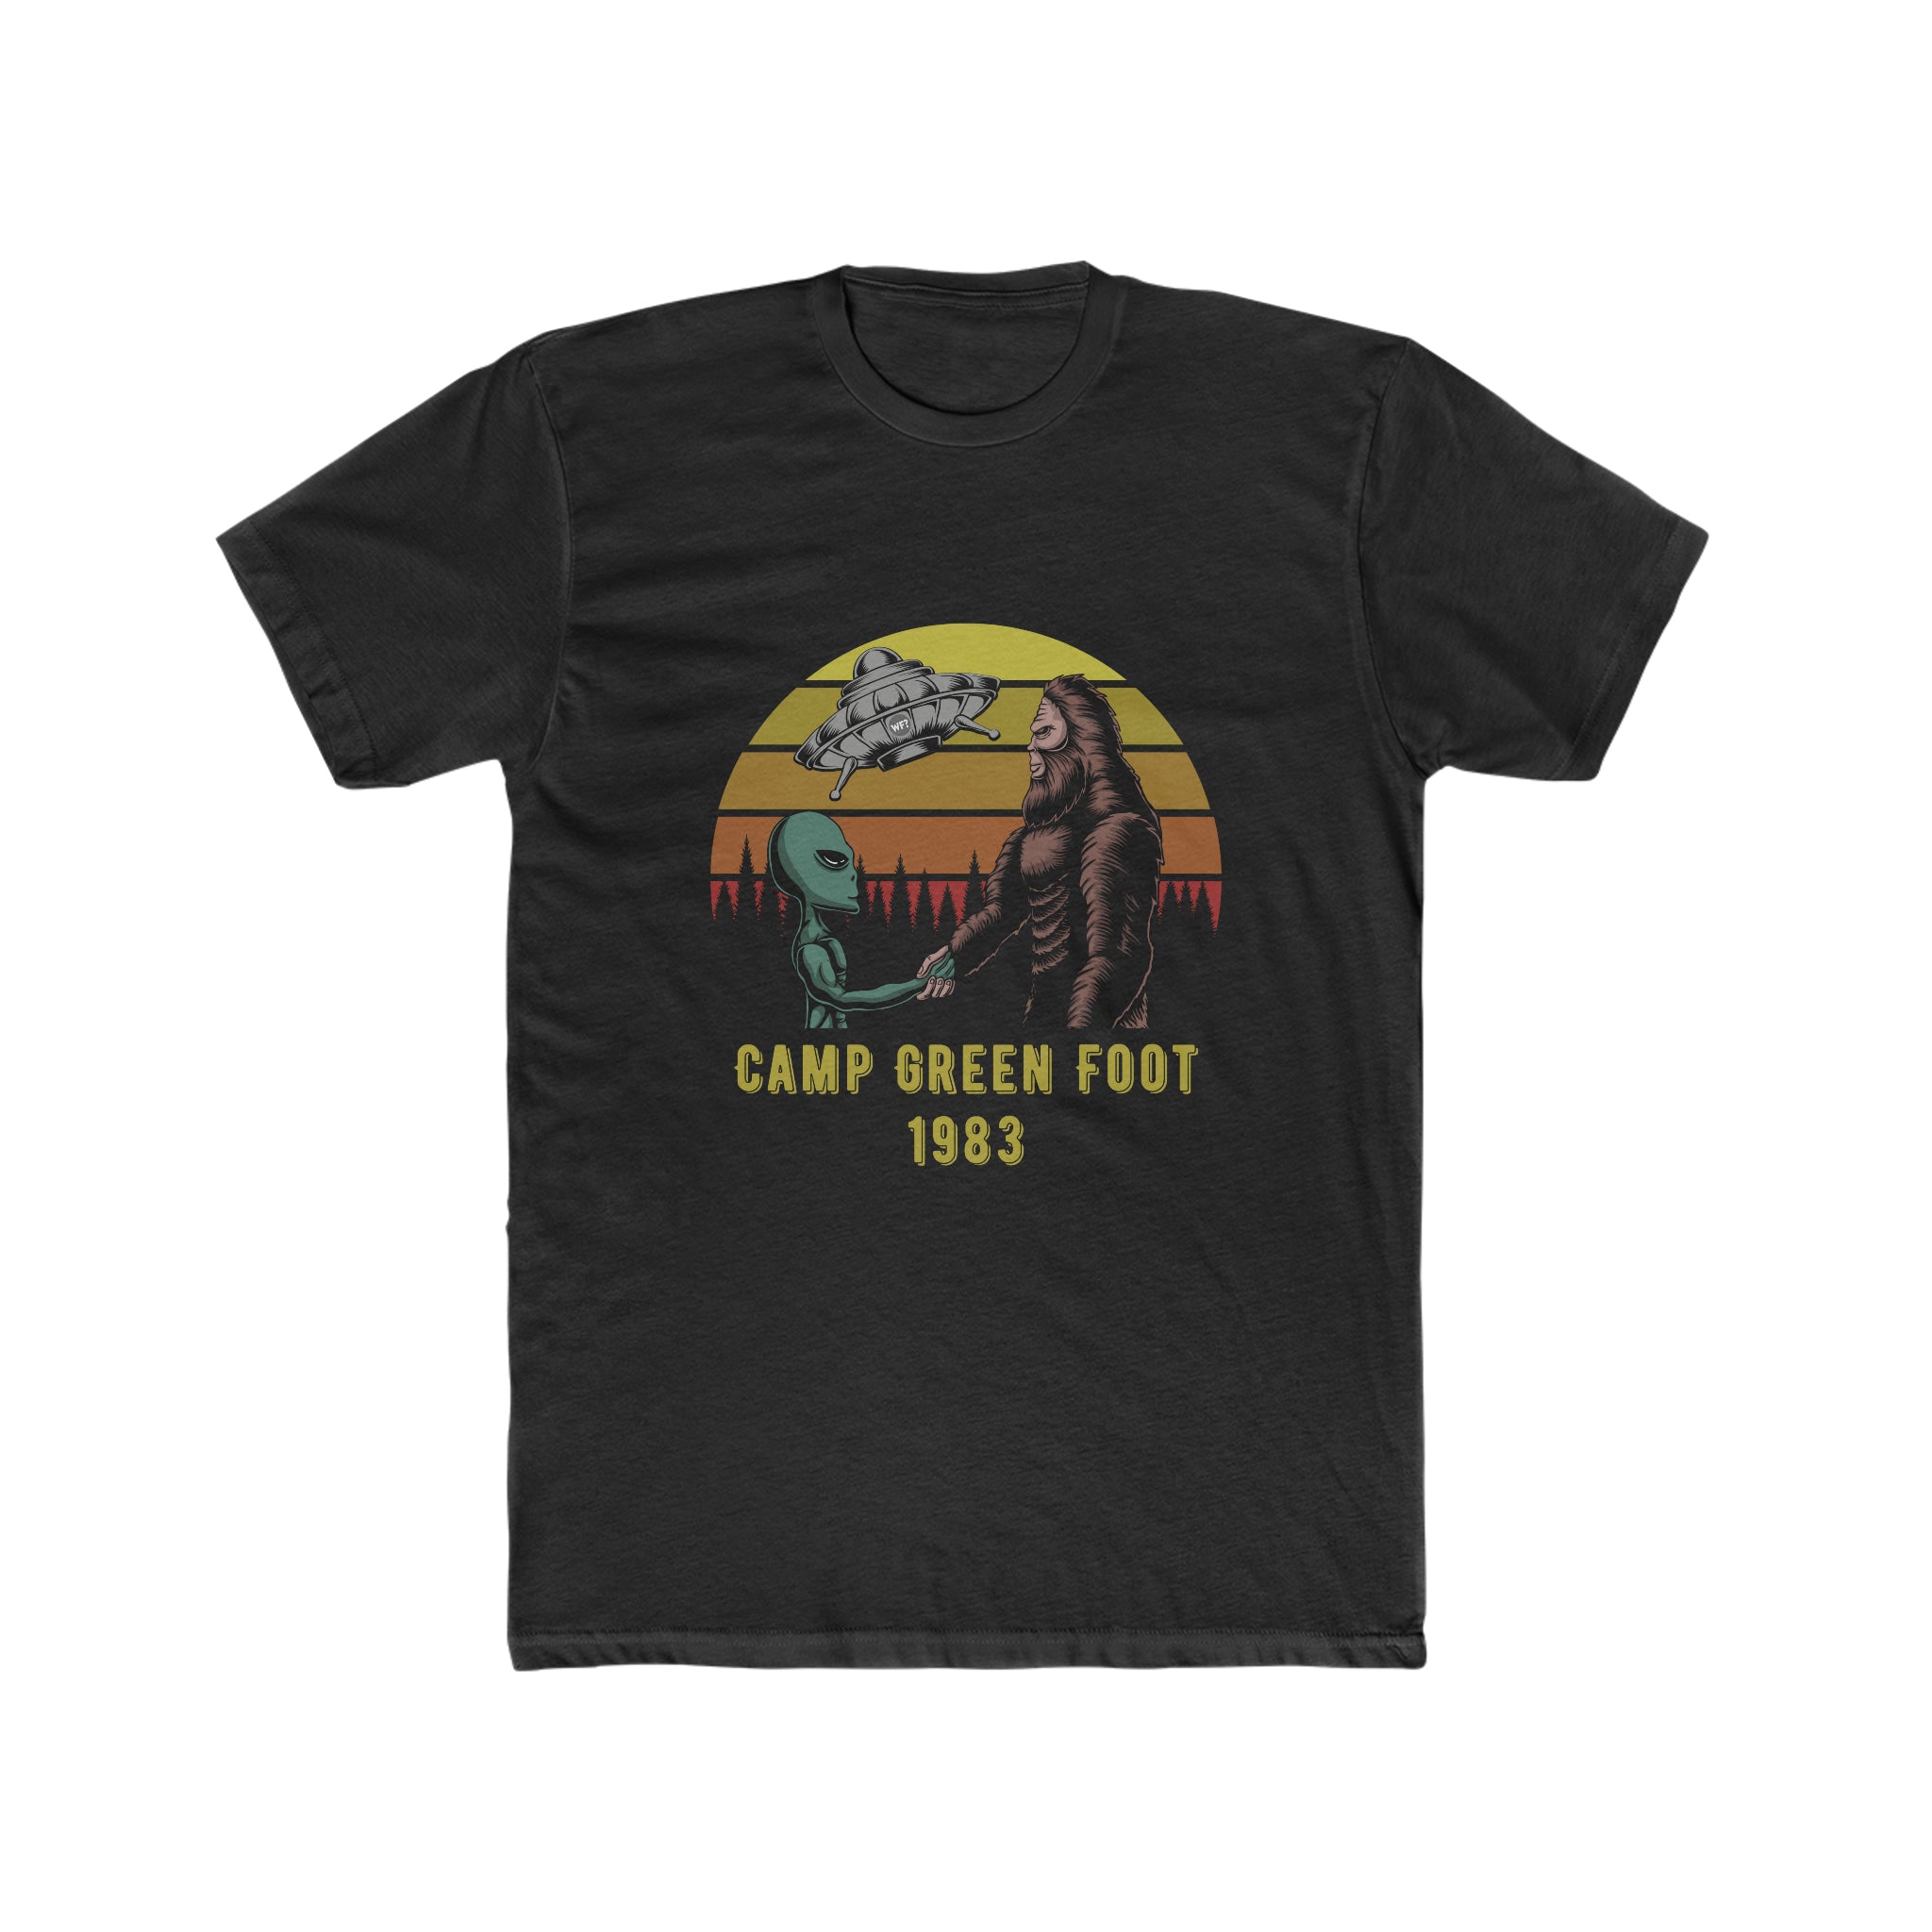 Buy solid-black Camp Green Foot 1983 Unisex T-Shirt